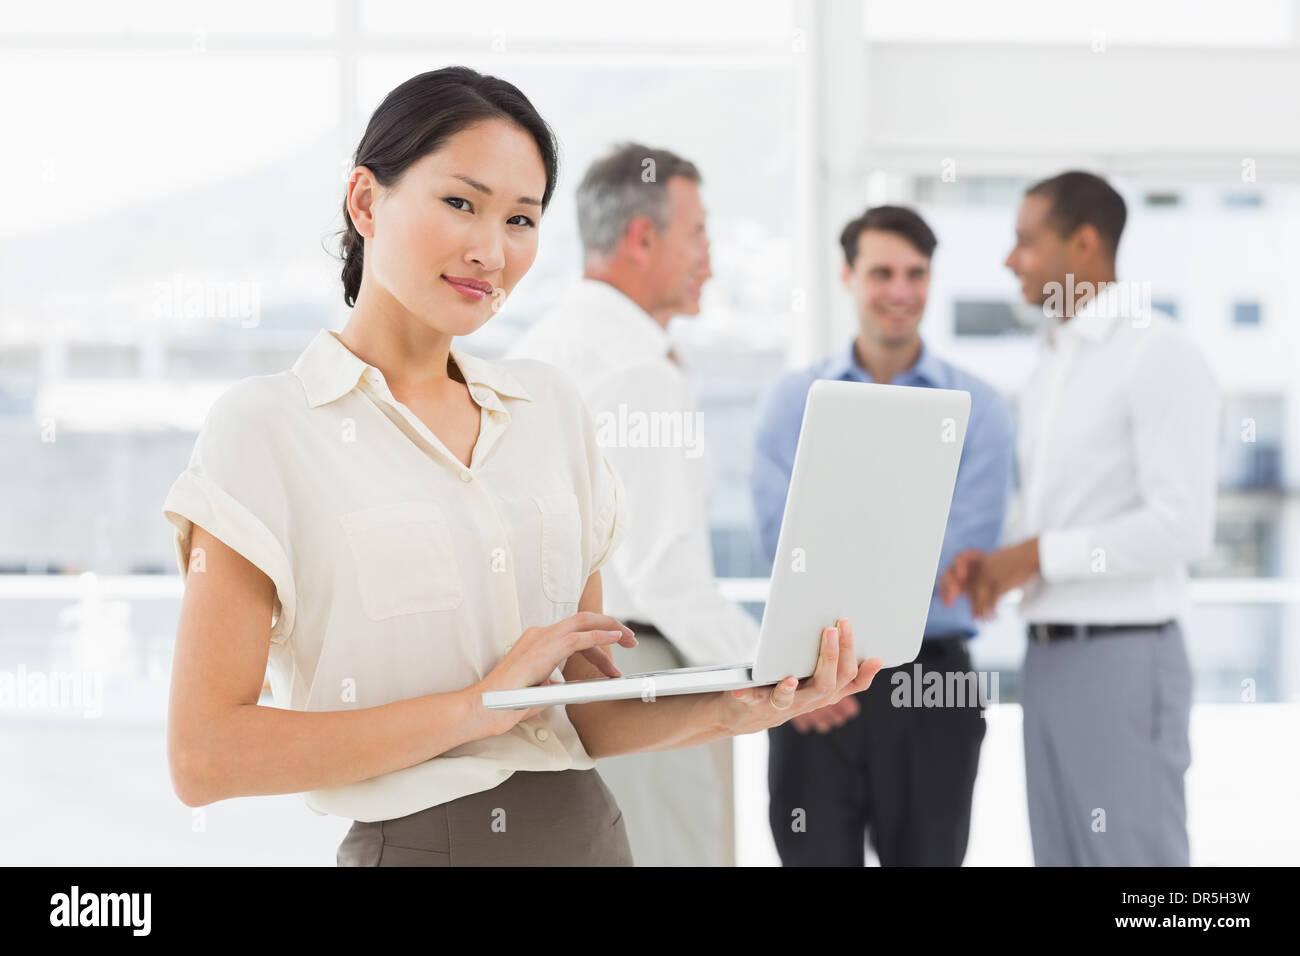 Asian businesswoman using laptop with team behind her Stock Photo